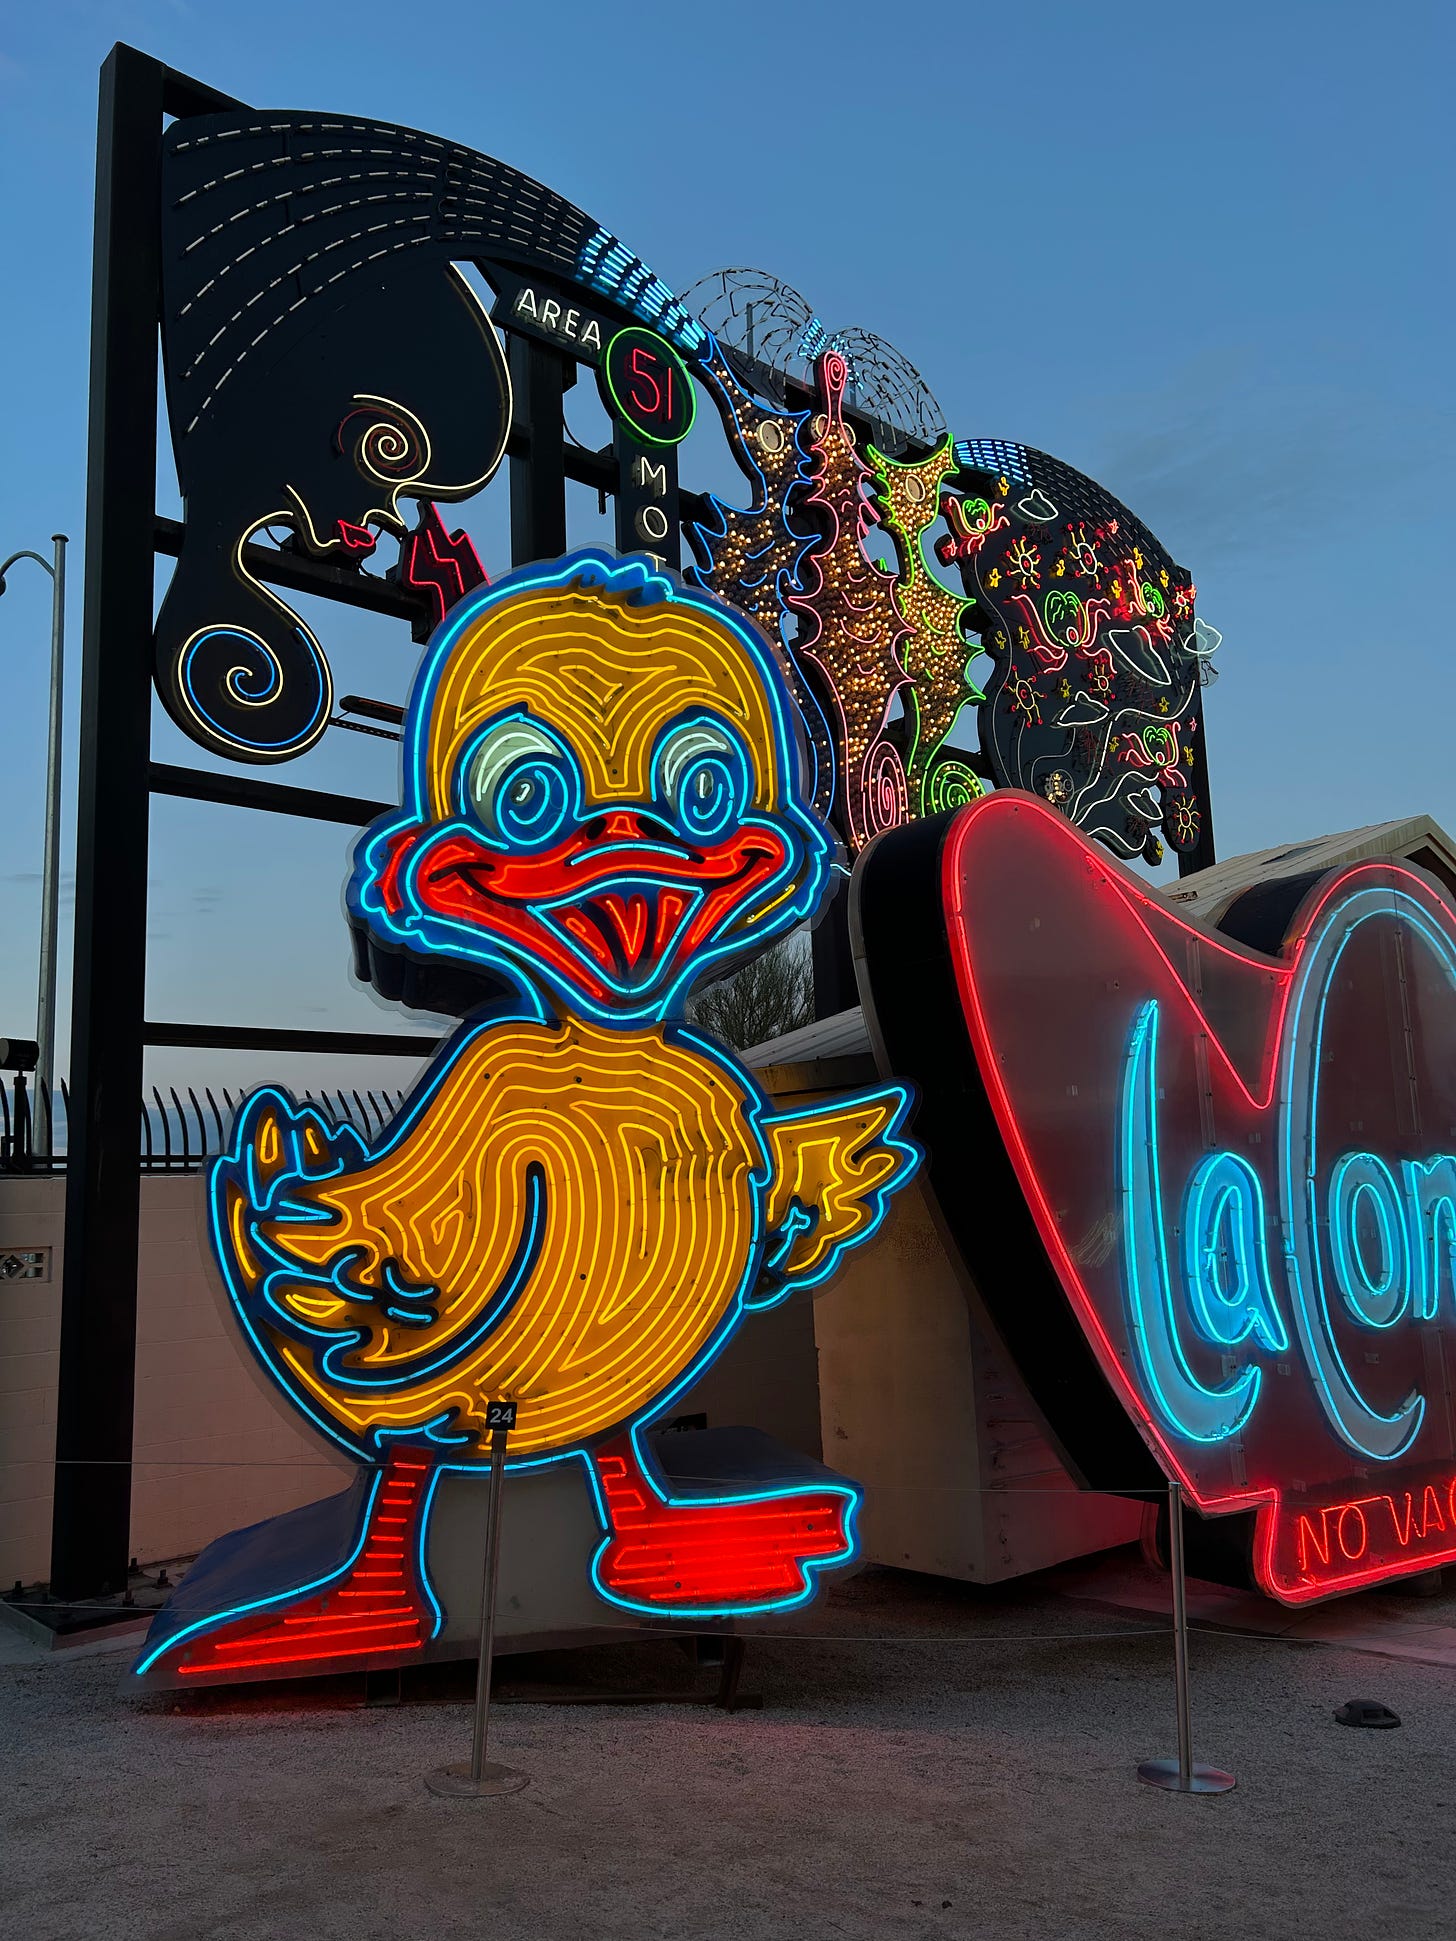 A giant neon sign in the shape of a duck, colored blue, red, and yellow, stands in front of a metal structure with various neon signs tacked onto it; there is also a big red heart-shaped neon sign beside the duck